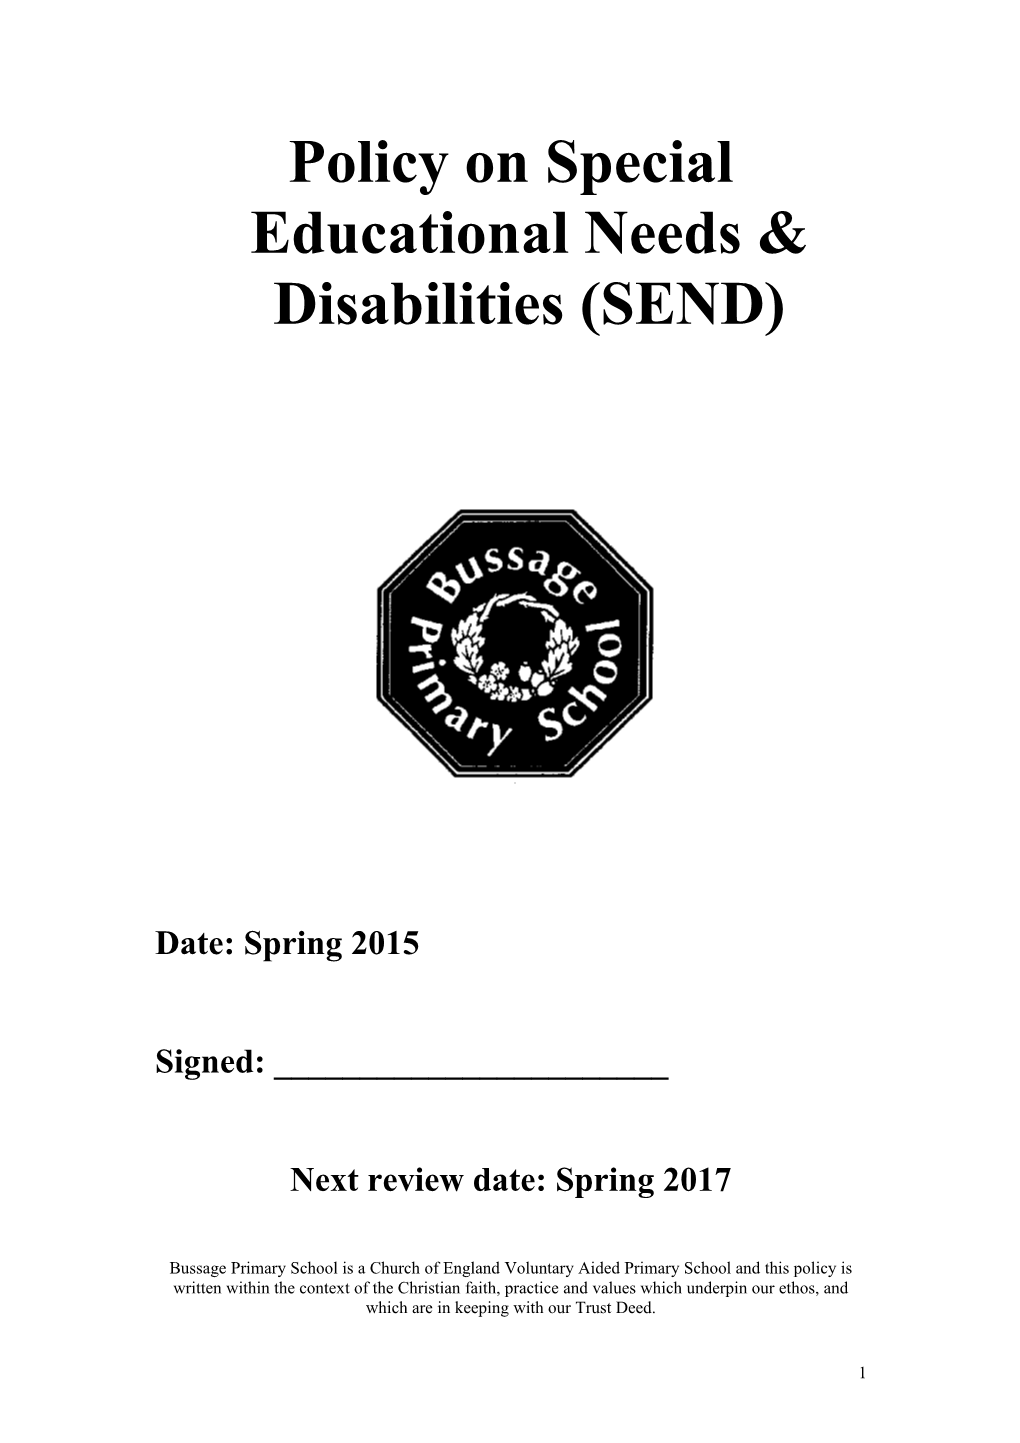 Policy on Special Educational Needs & Disabilities (SEND)